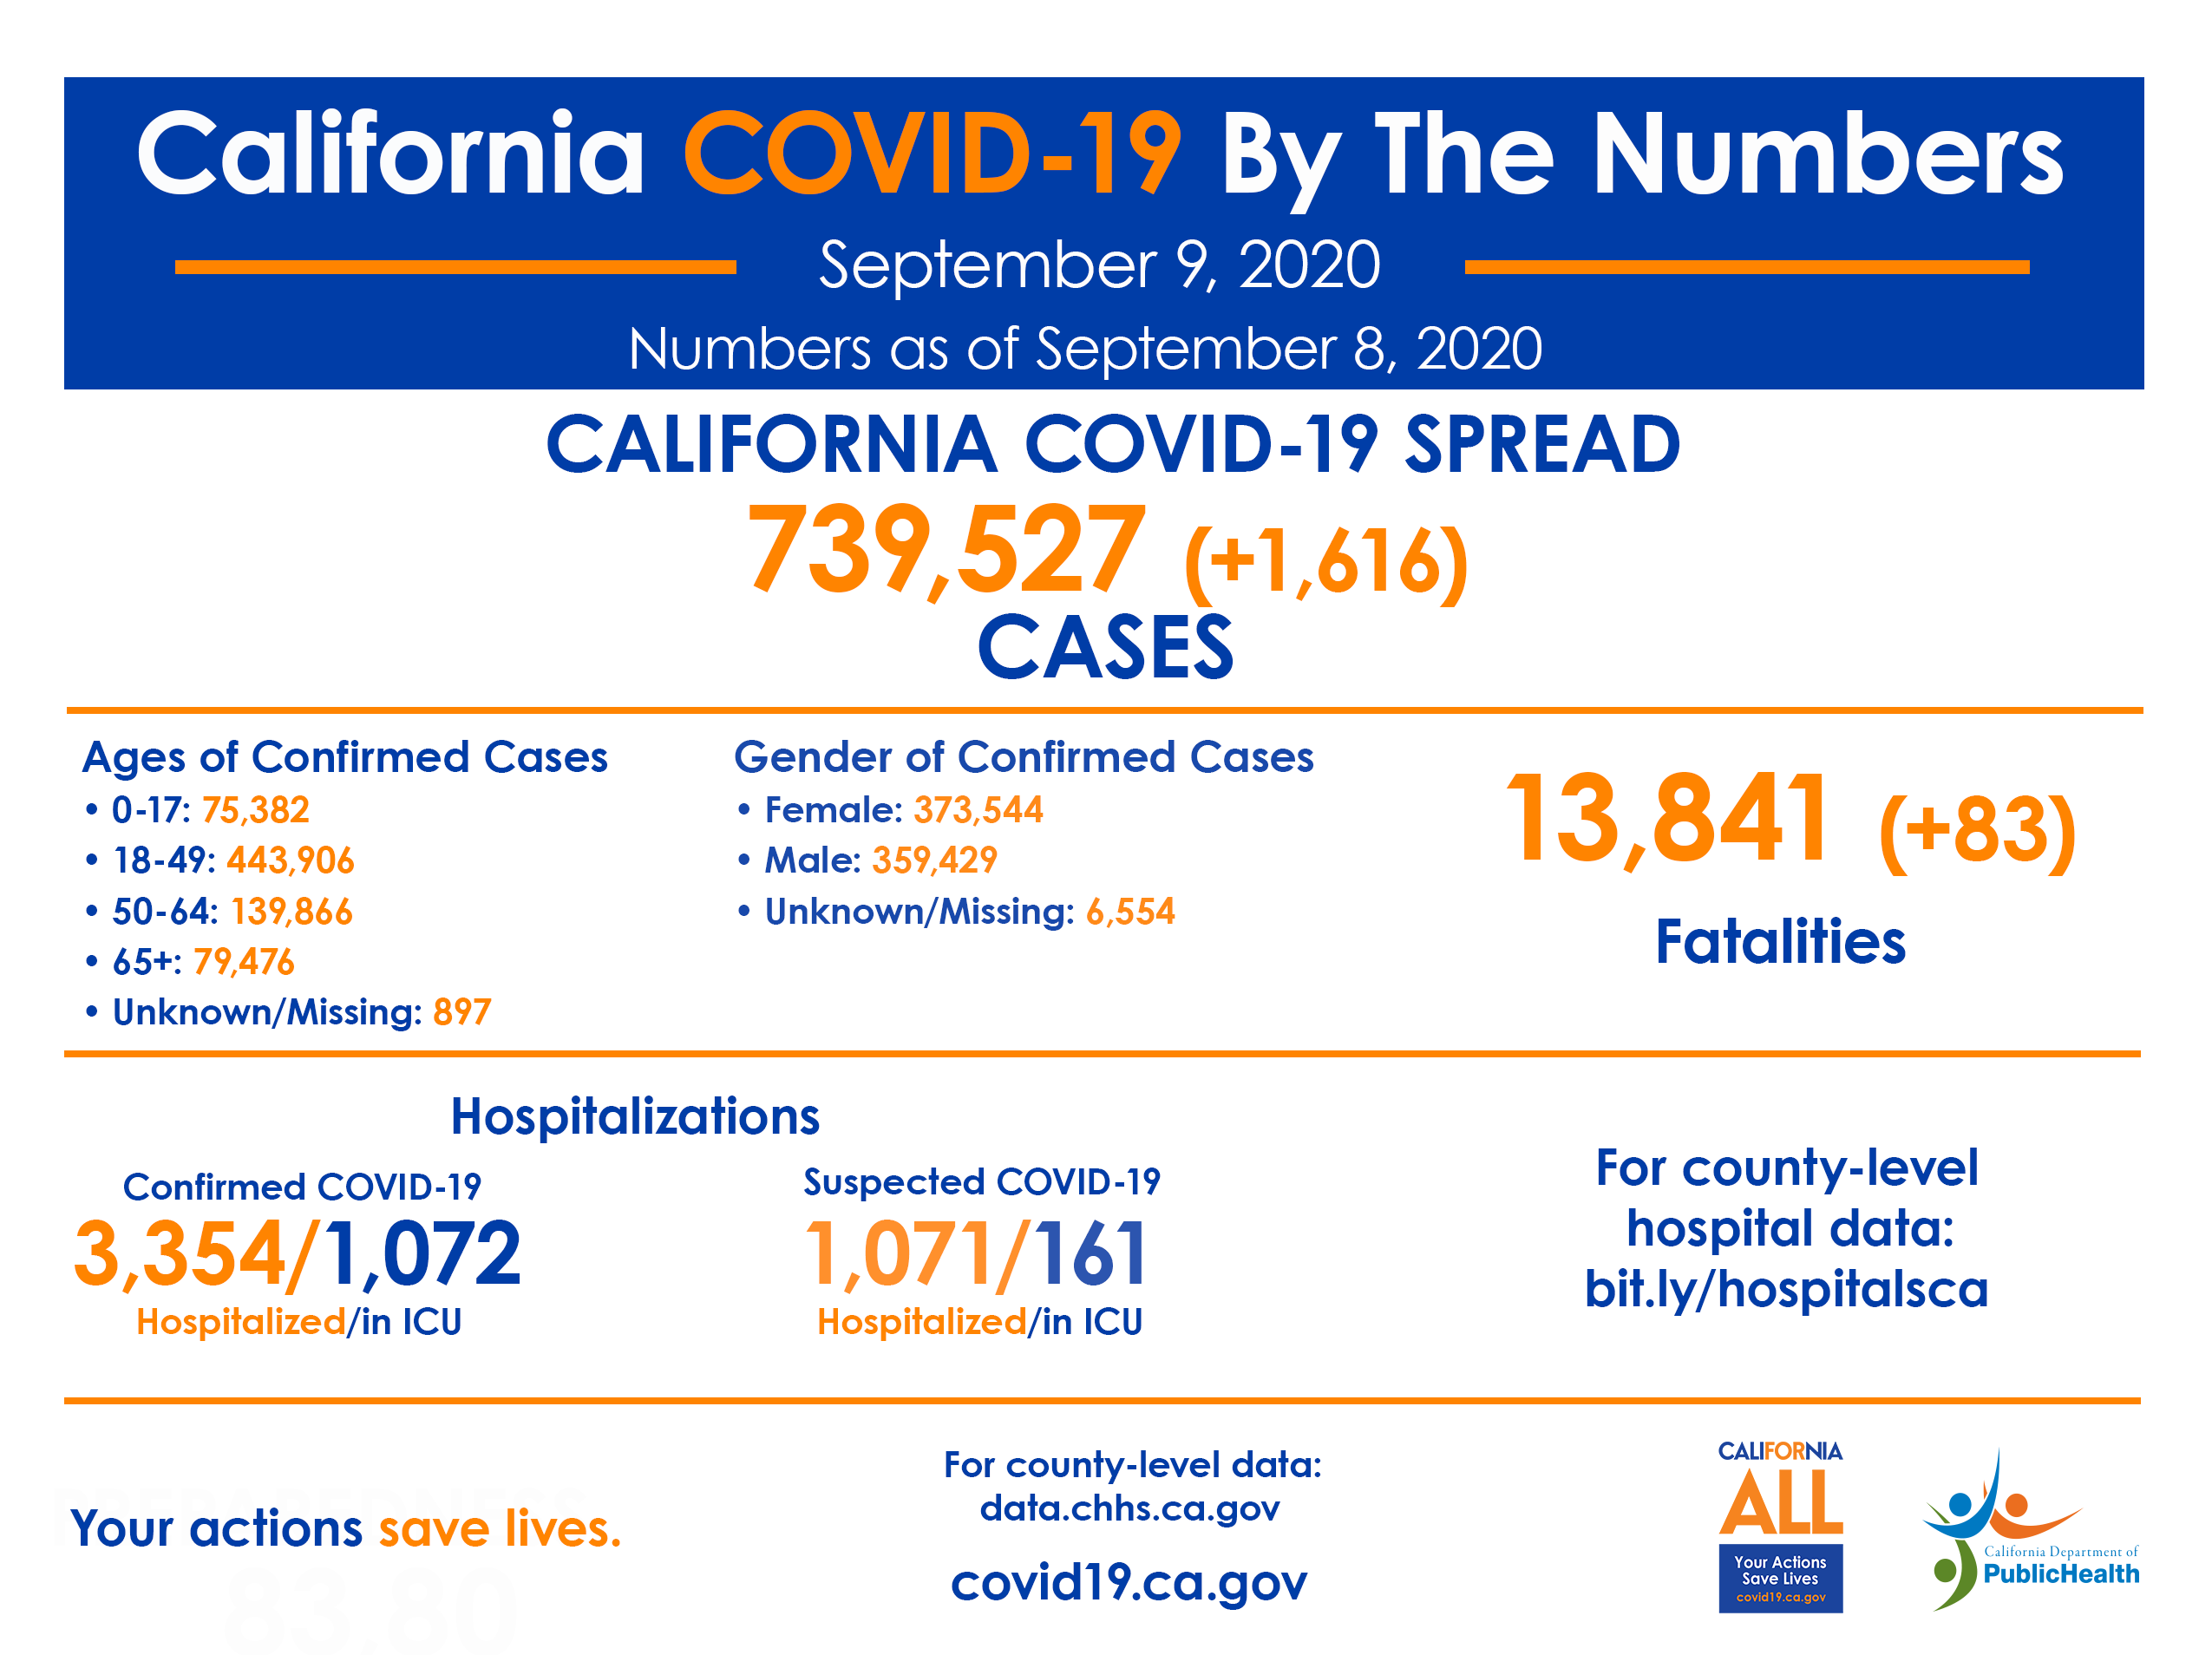 California COVID-19 By the Numbers